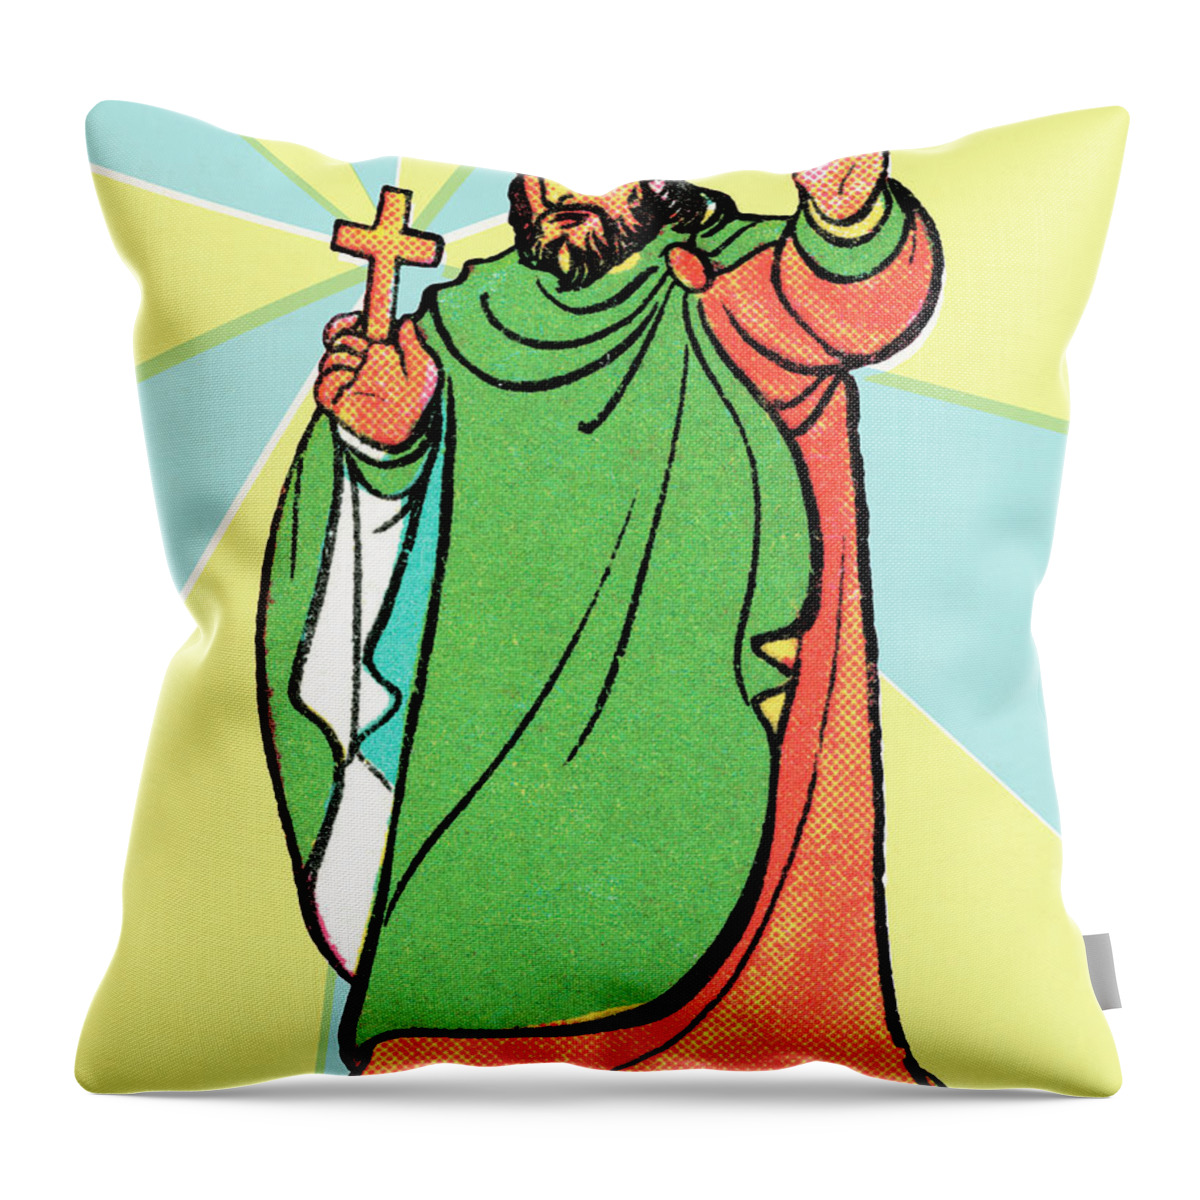 Belief Throw Pillow featuring the drawing Preacher by CSA Images